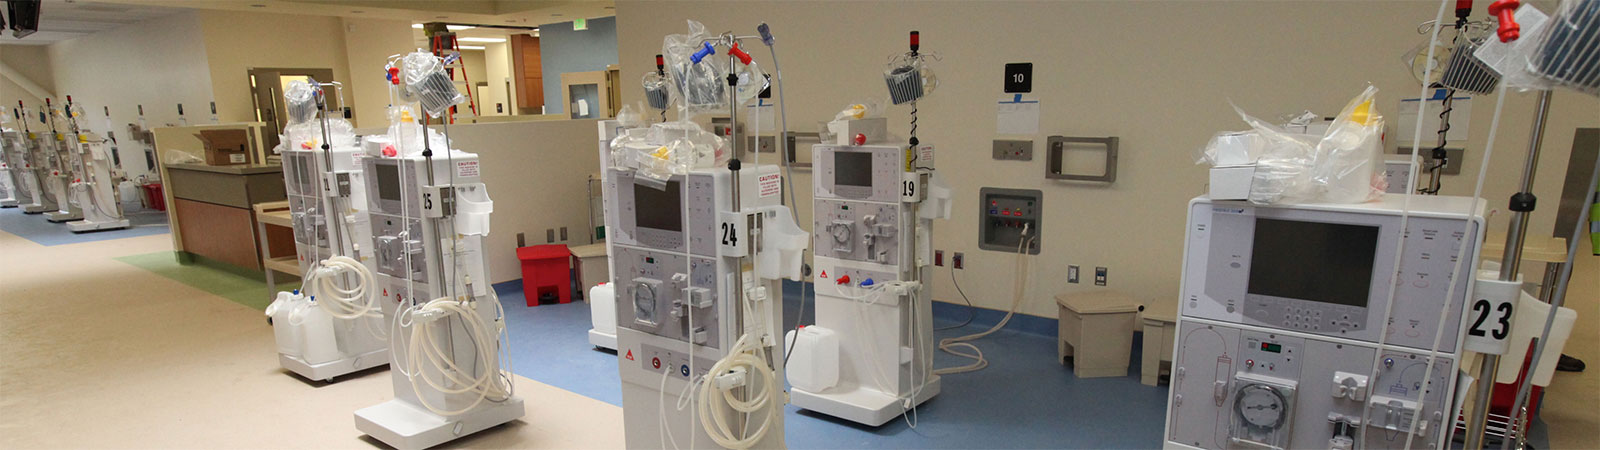 Dialysis machines at a CCHCS institution